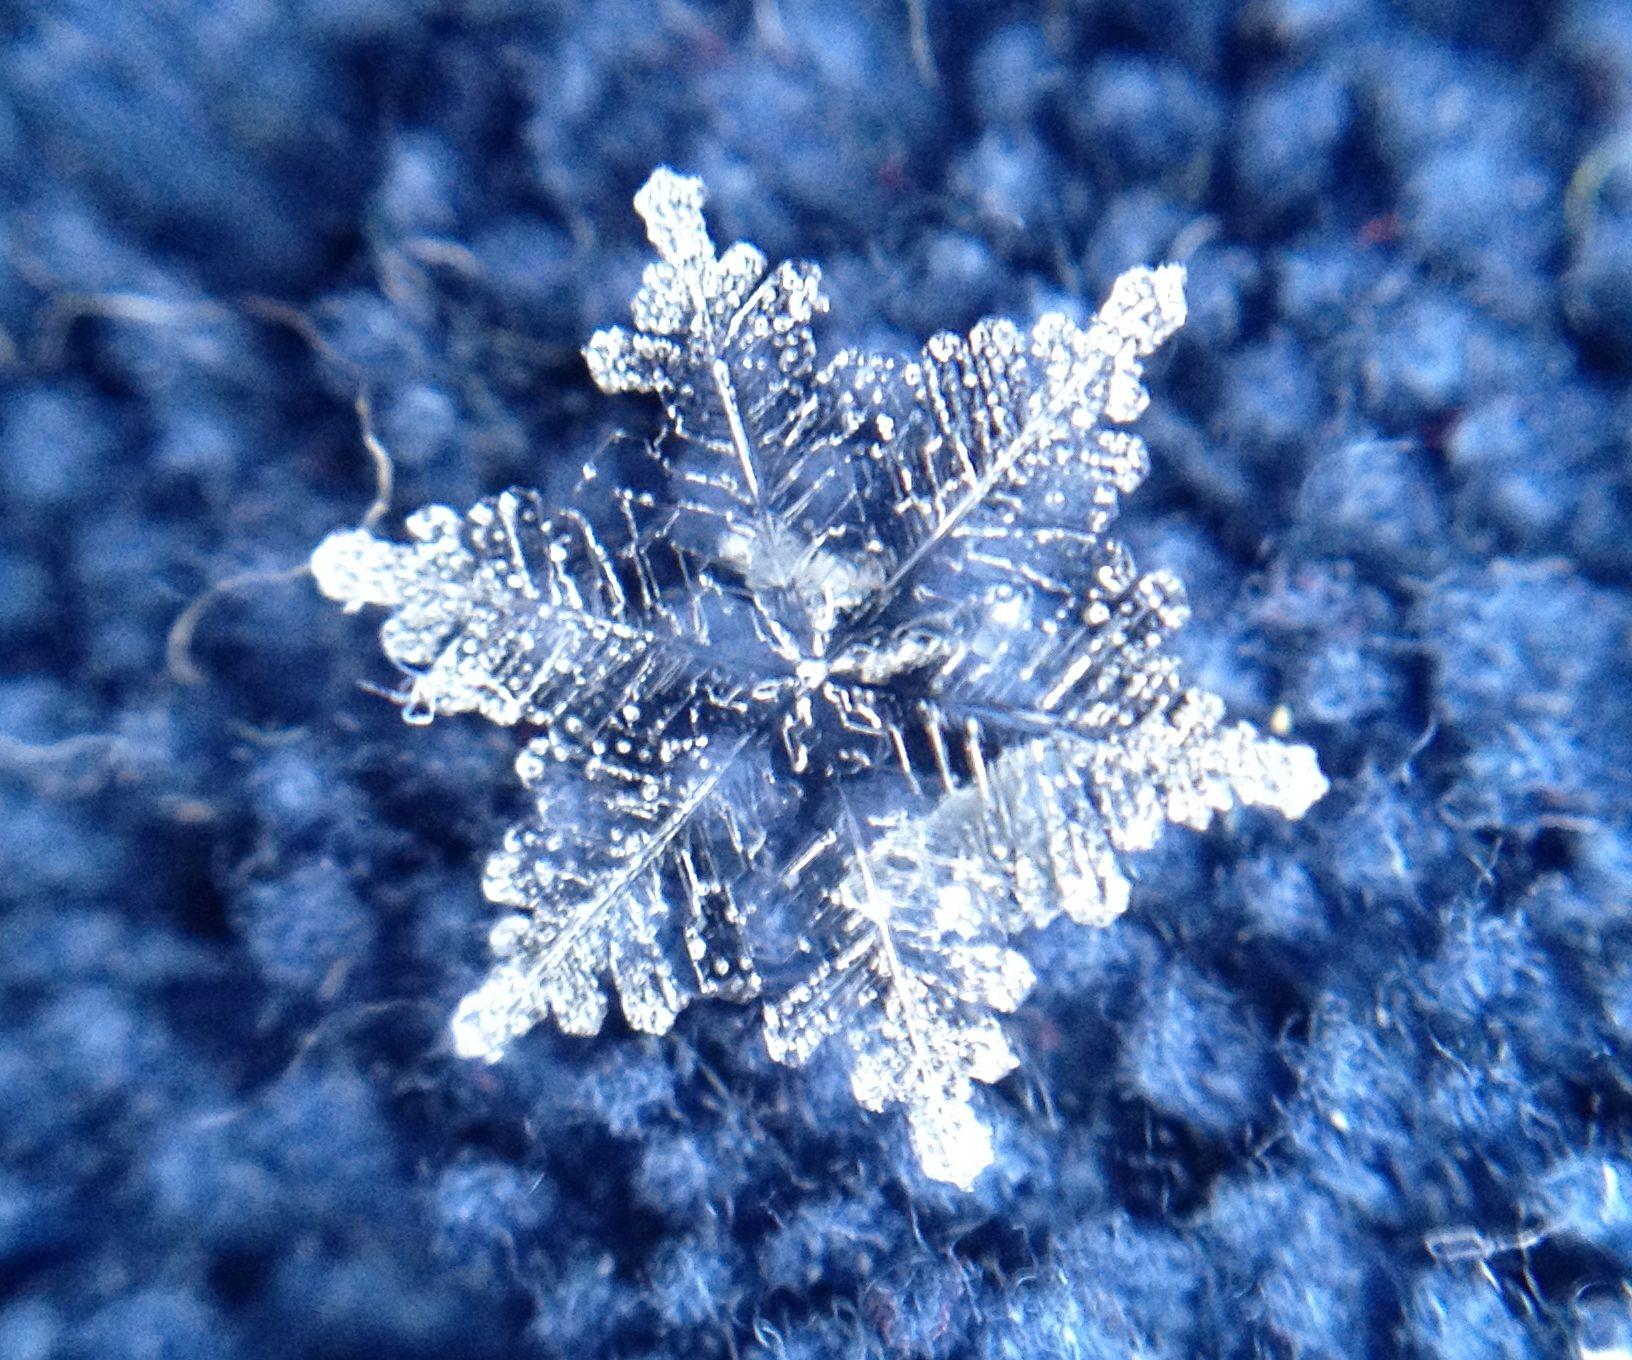 Macro iPhone image of snowflakes from a Midwest snowstorm